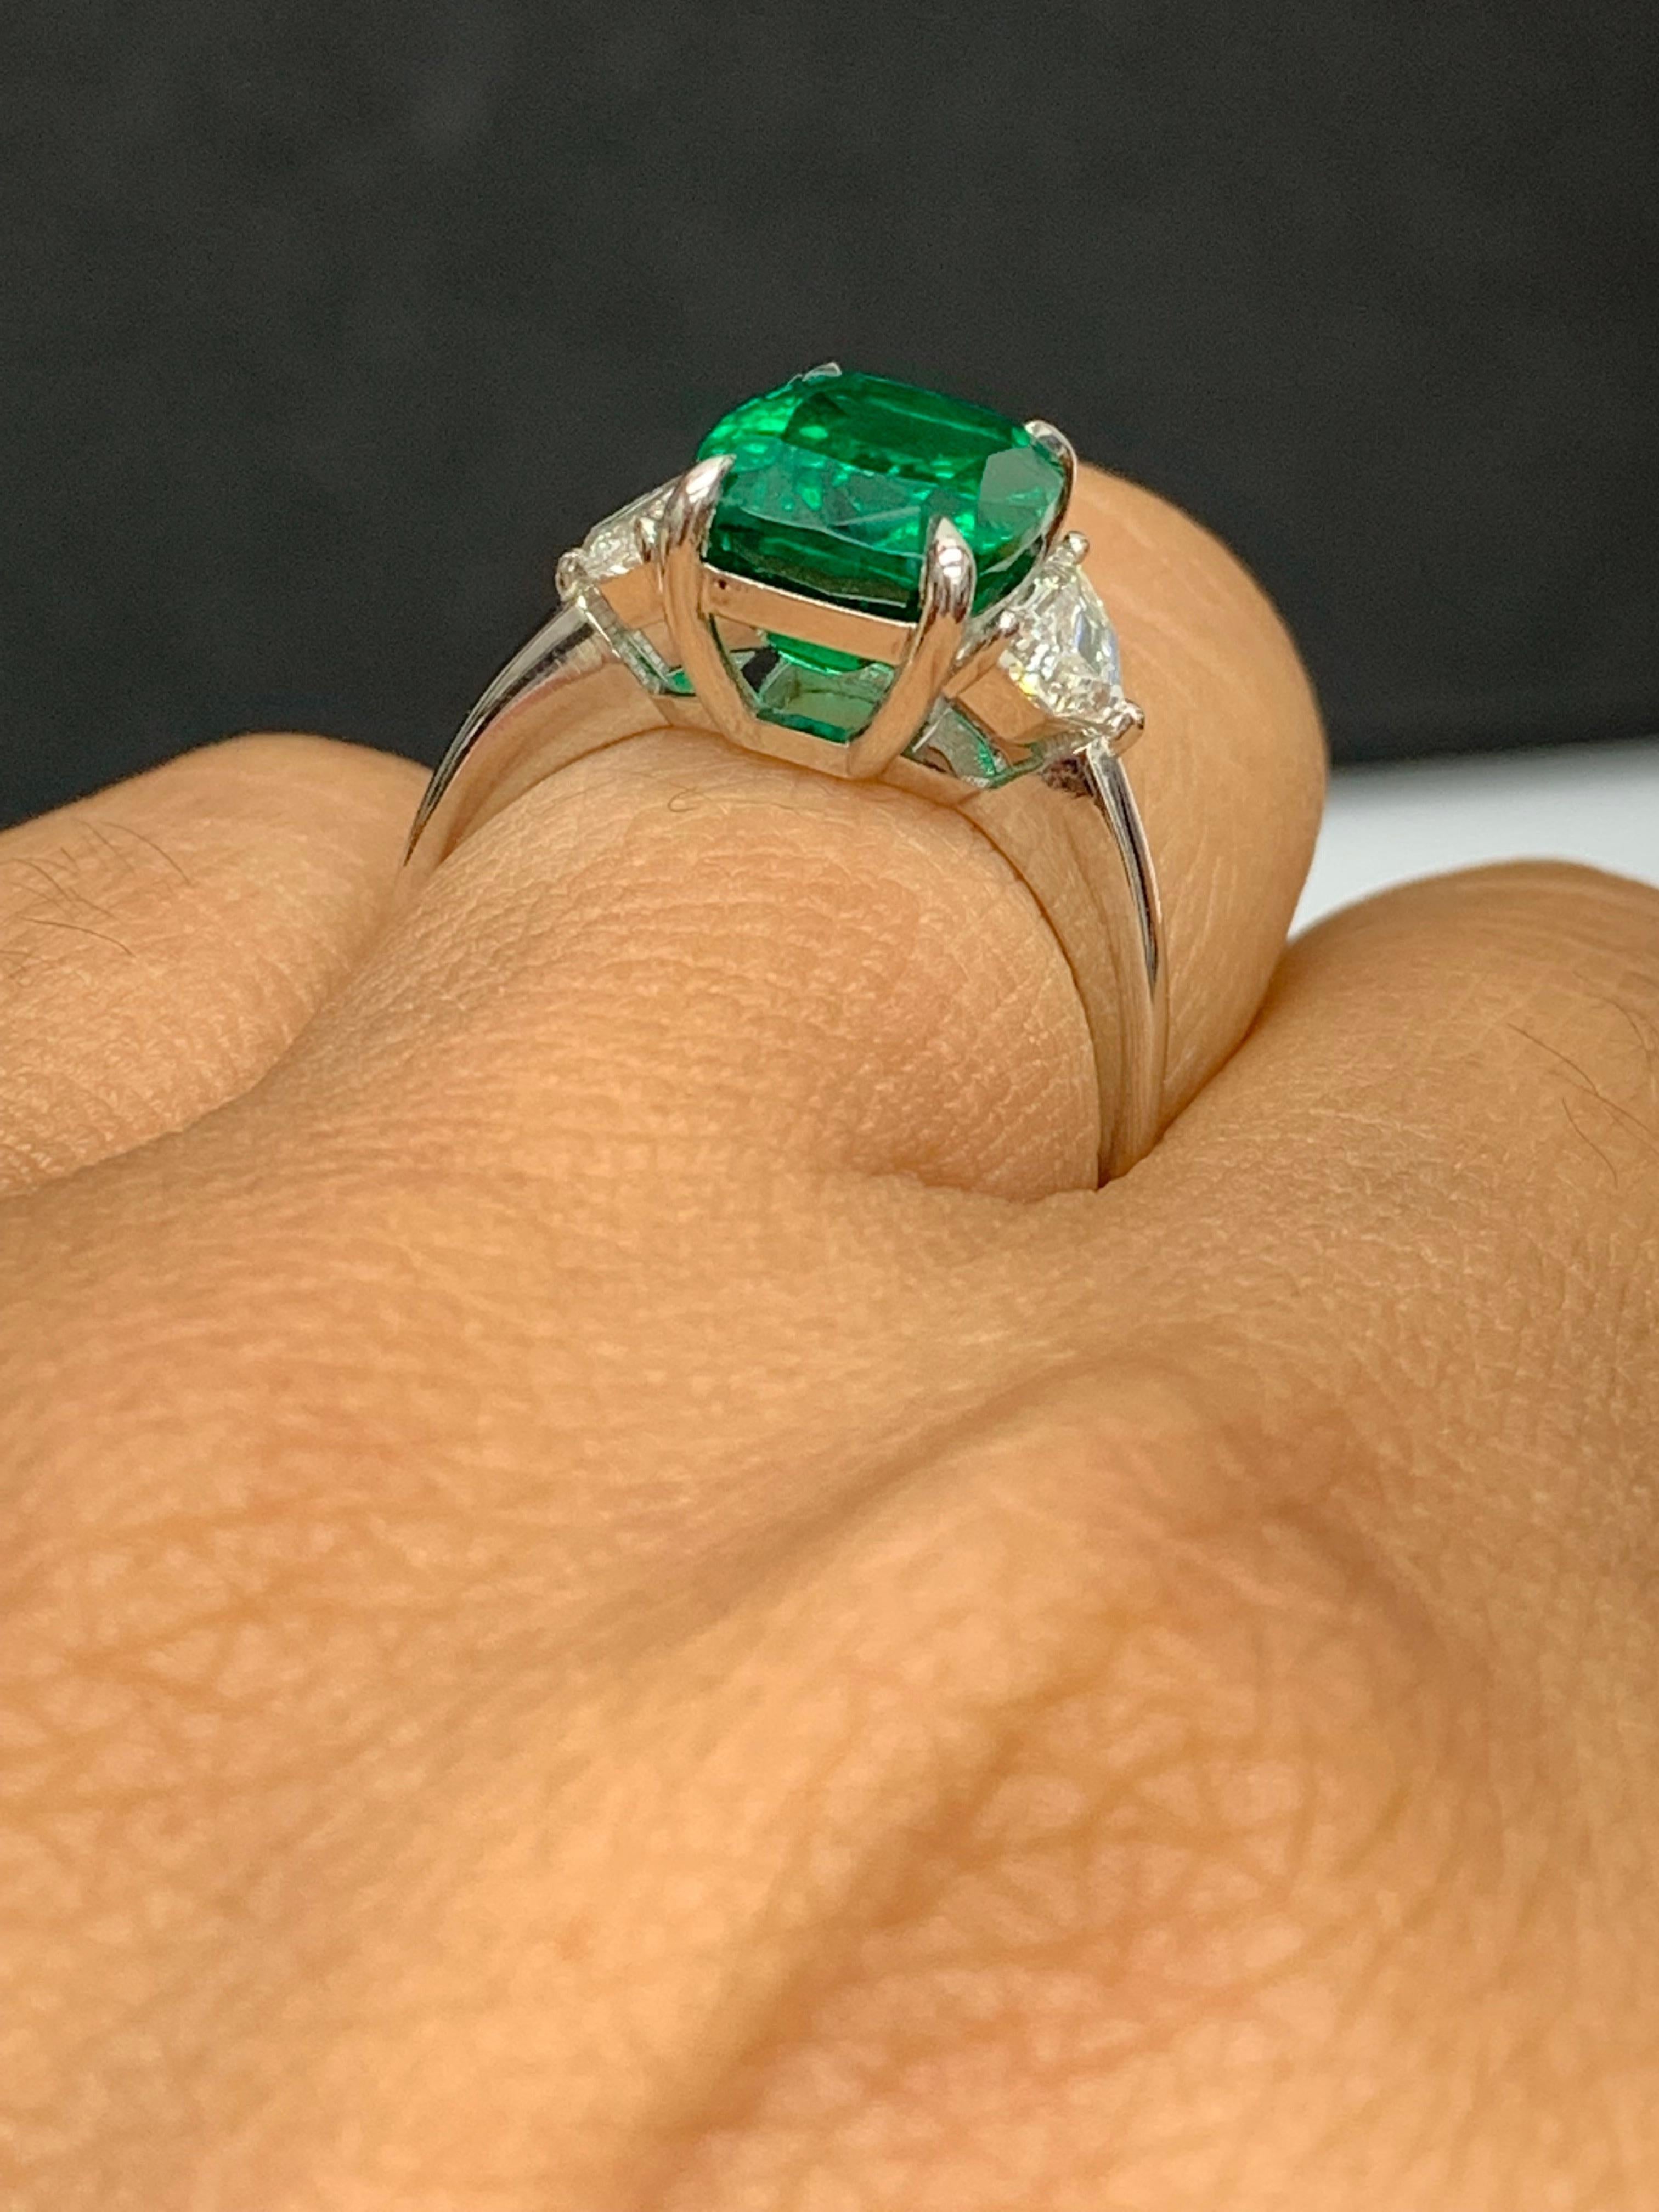 Certified 3.49 Carat Cushion Cut Emerald & Diamond Engagement Ring in Platinum For Sale 2